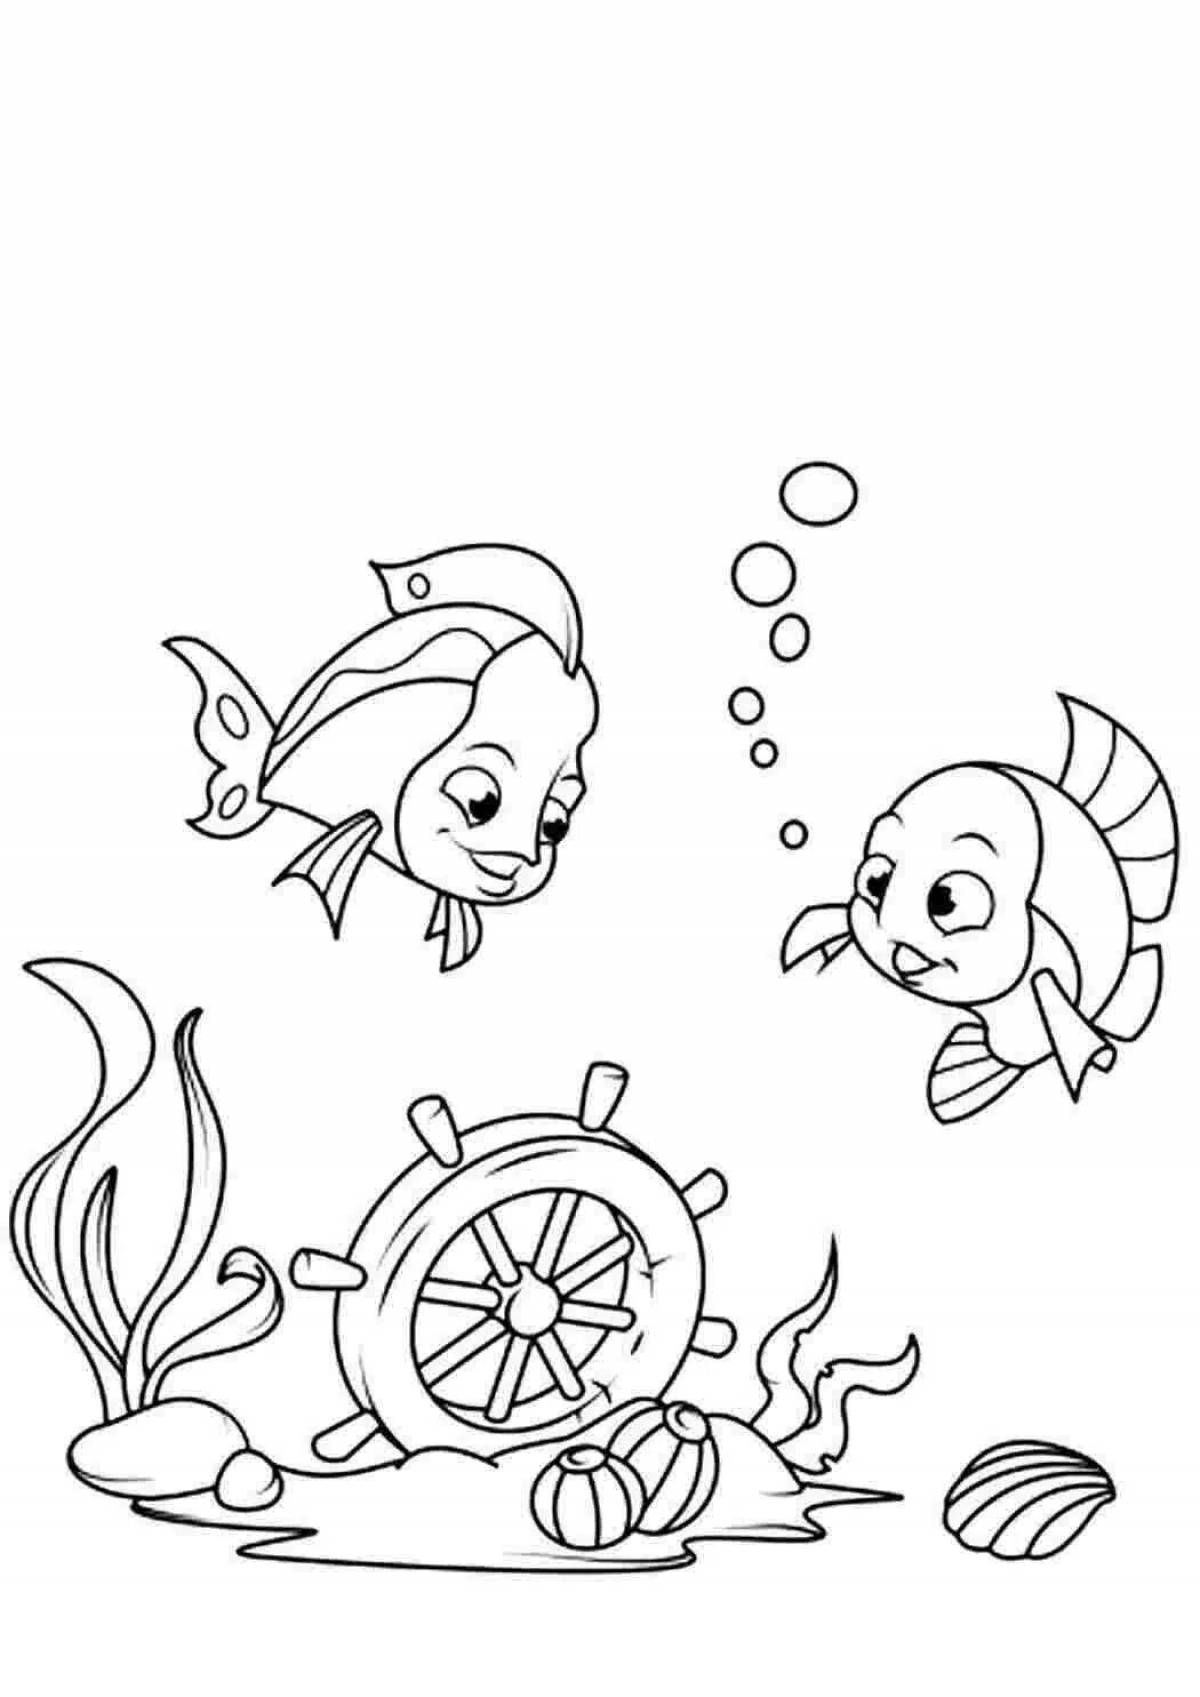 Seabed for kids #1